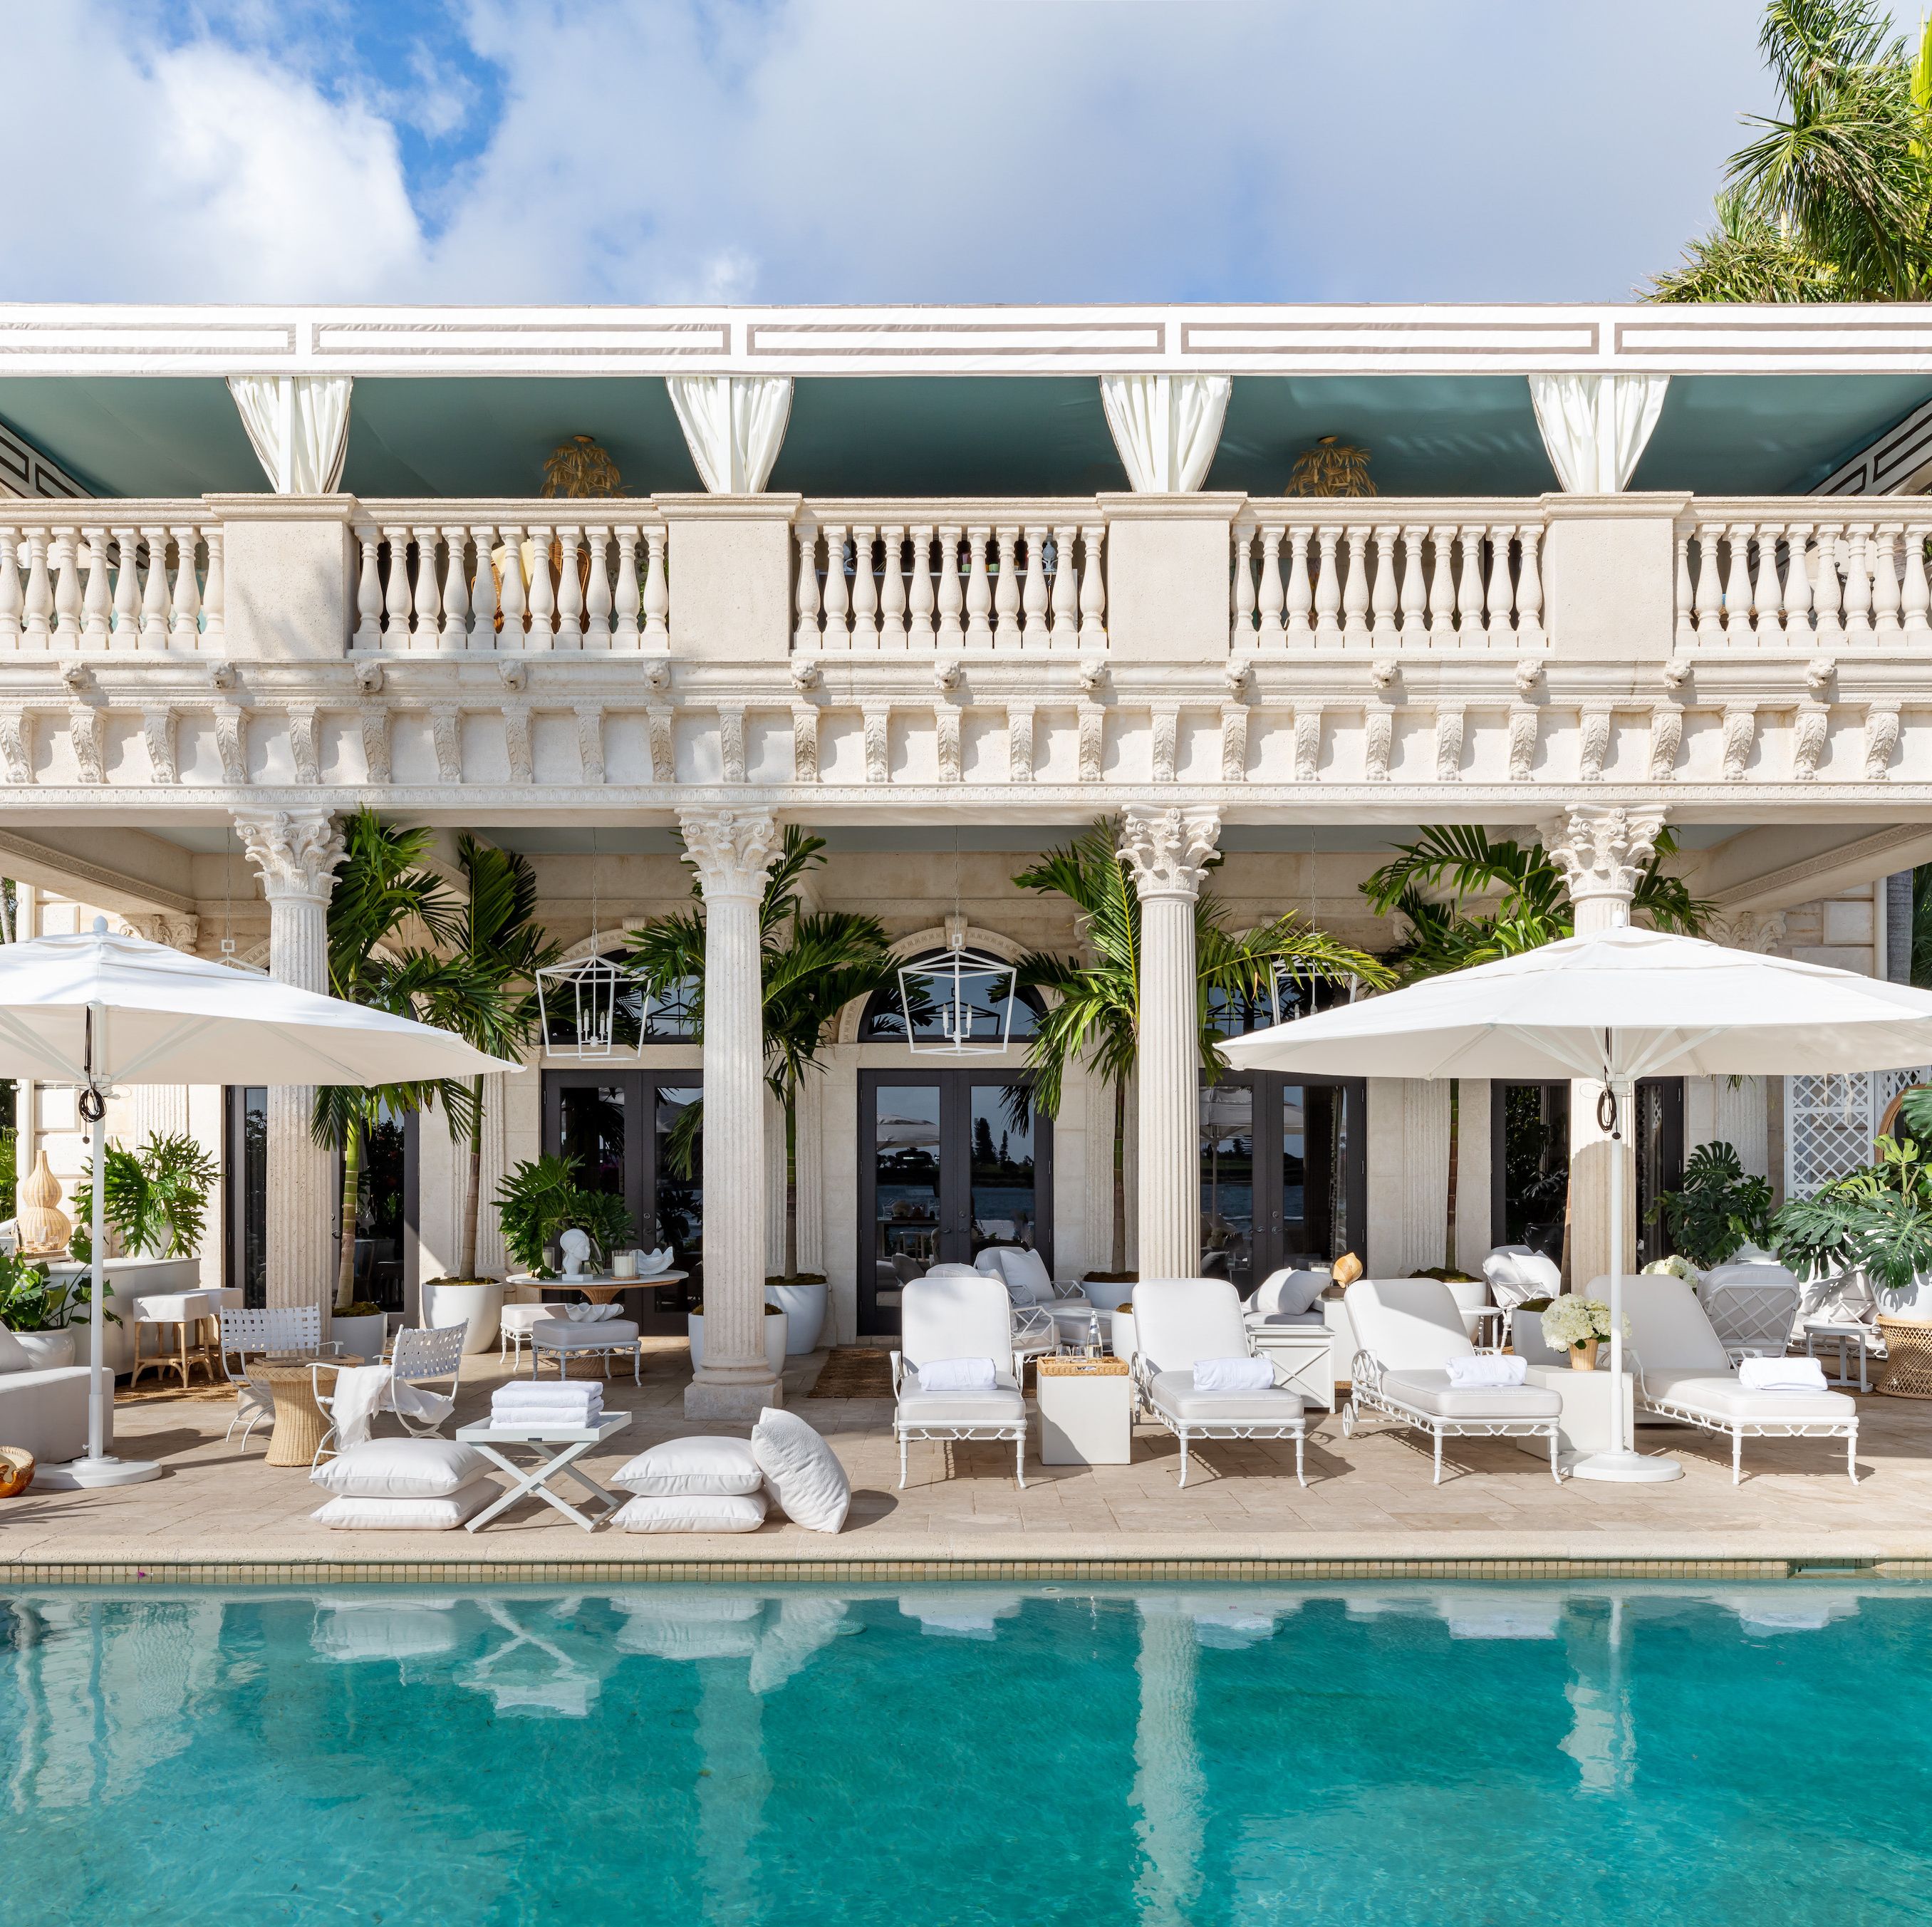 Tour the 2023 Kips Bay Decorator Show House in Palm Beach